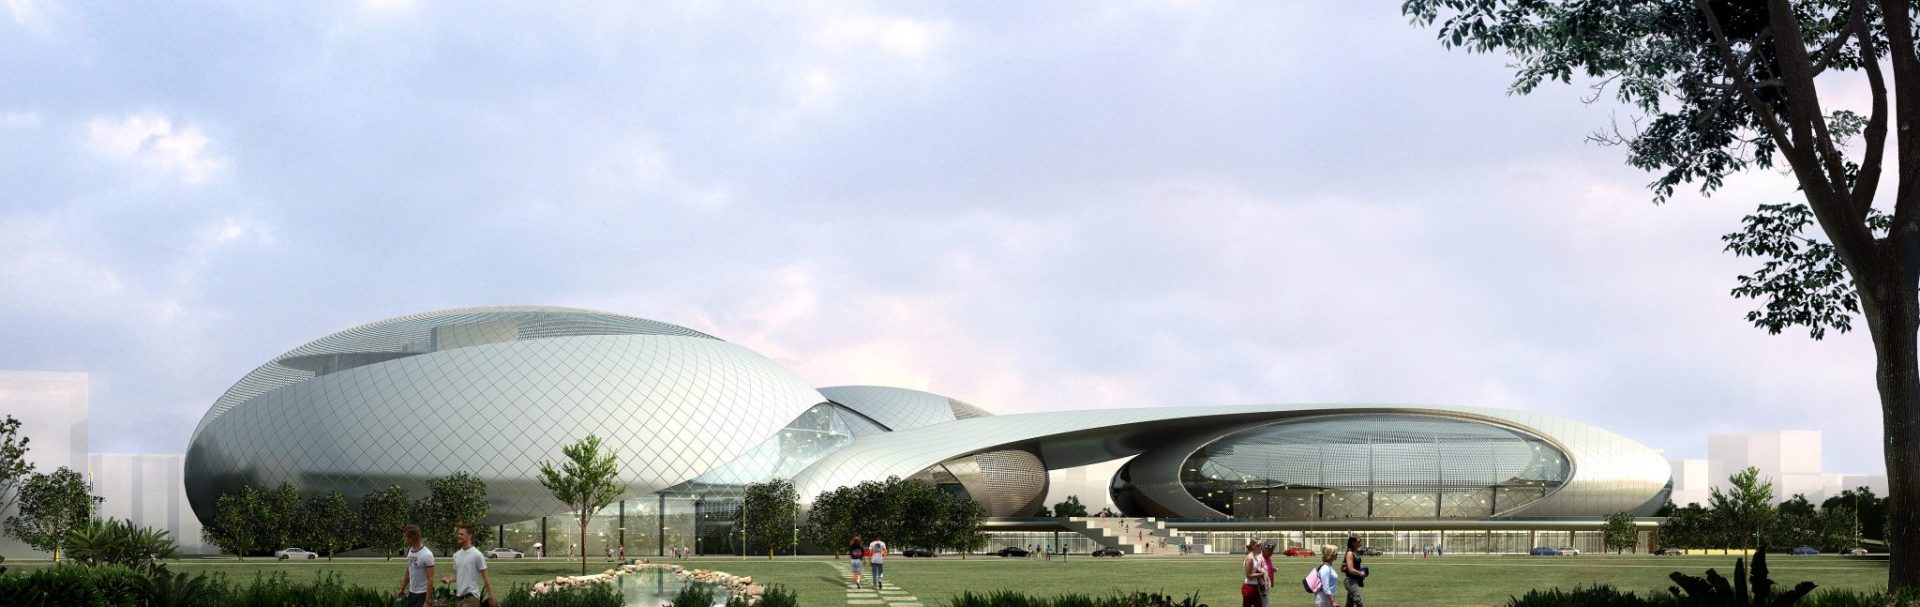 shenyang-sport-complex-lemay-architecture-asd